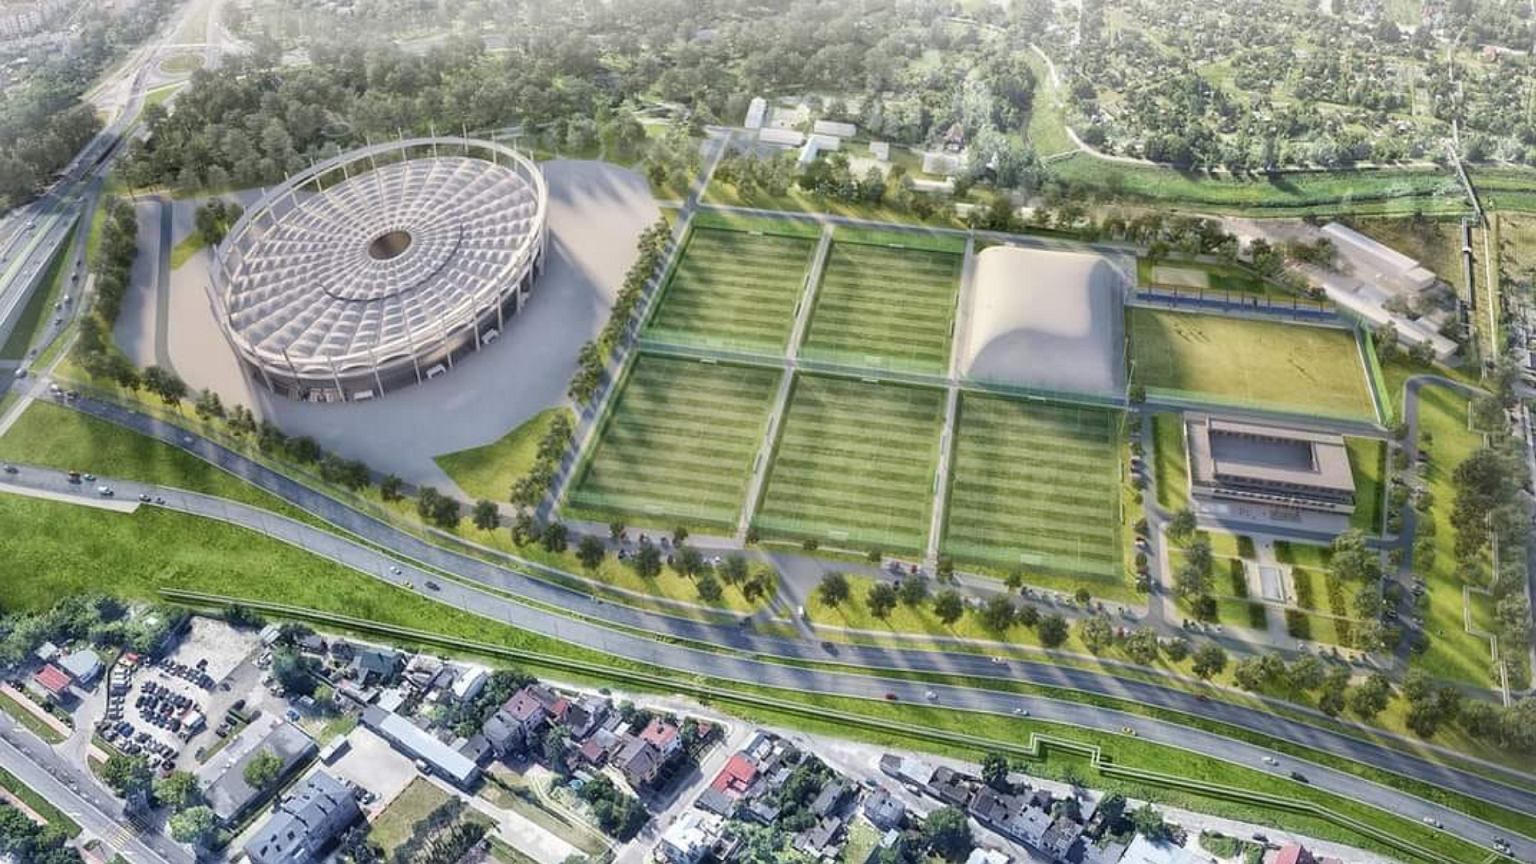 Here is a project for a new and beautiful stadium in Poland.  More space is needed